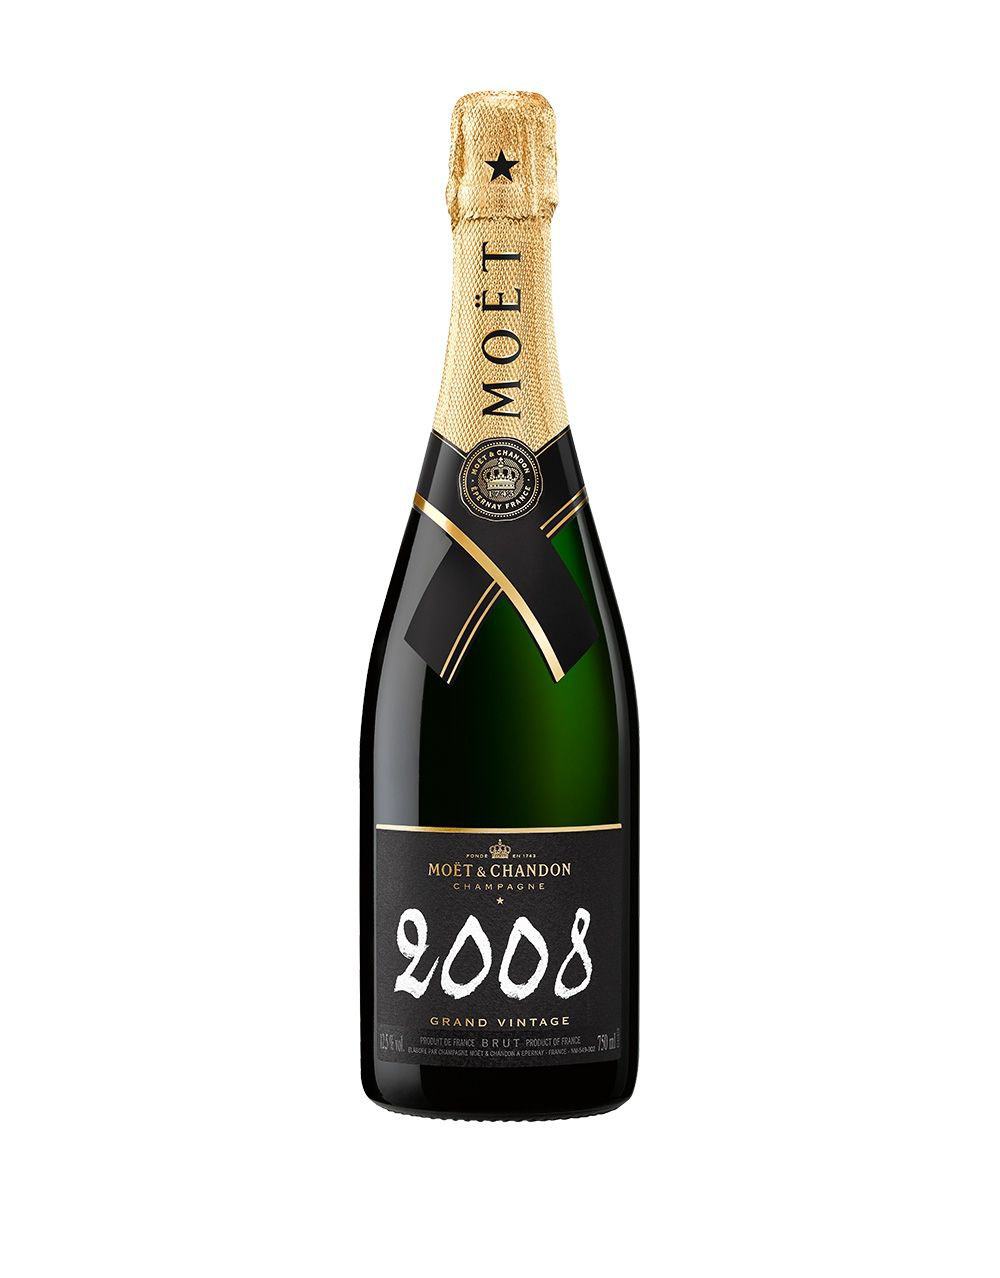 Moet and Chandon Grand Vintage 2012